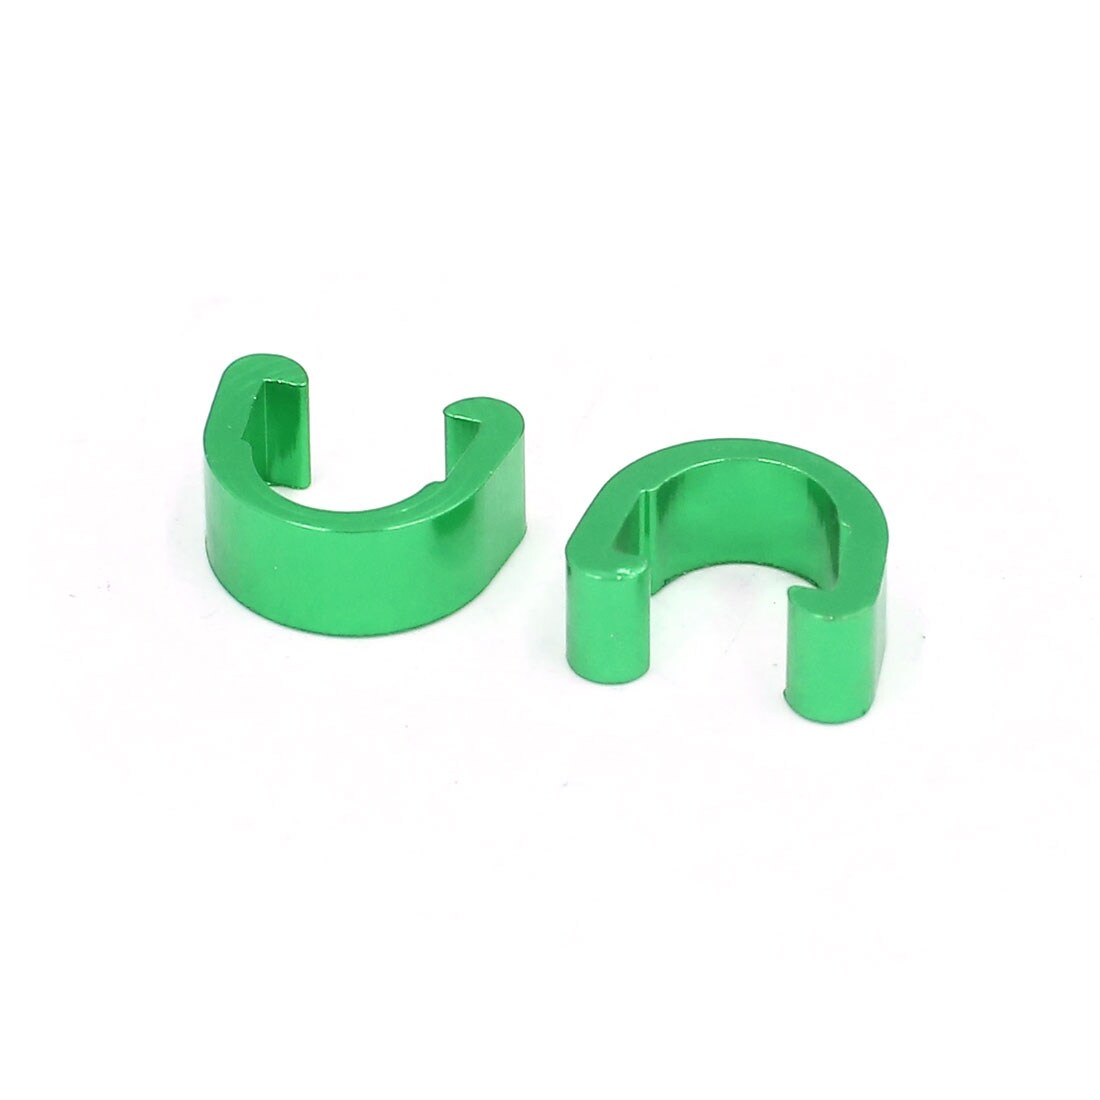 10 X Aluminium Brake Cable Shift Cable Holder C-Clip Bicycle Green